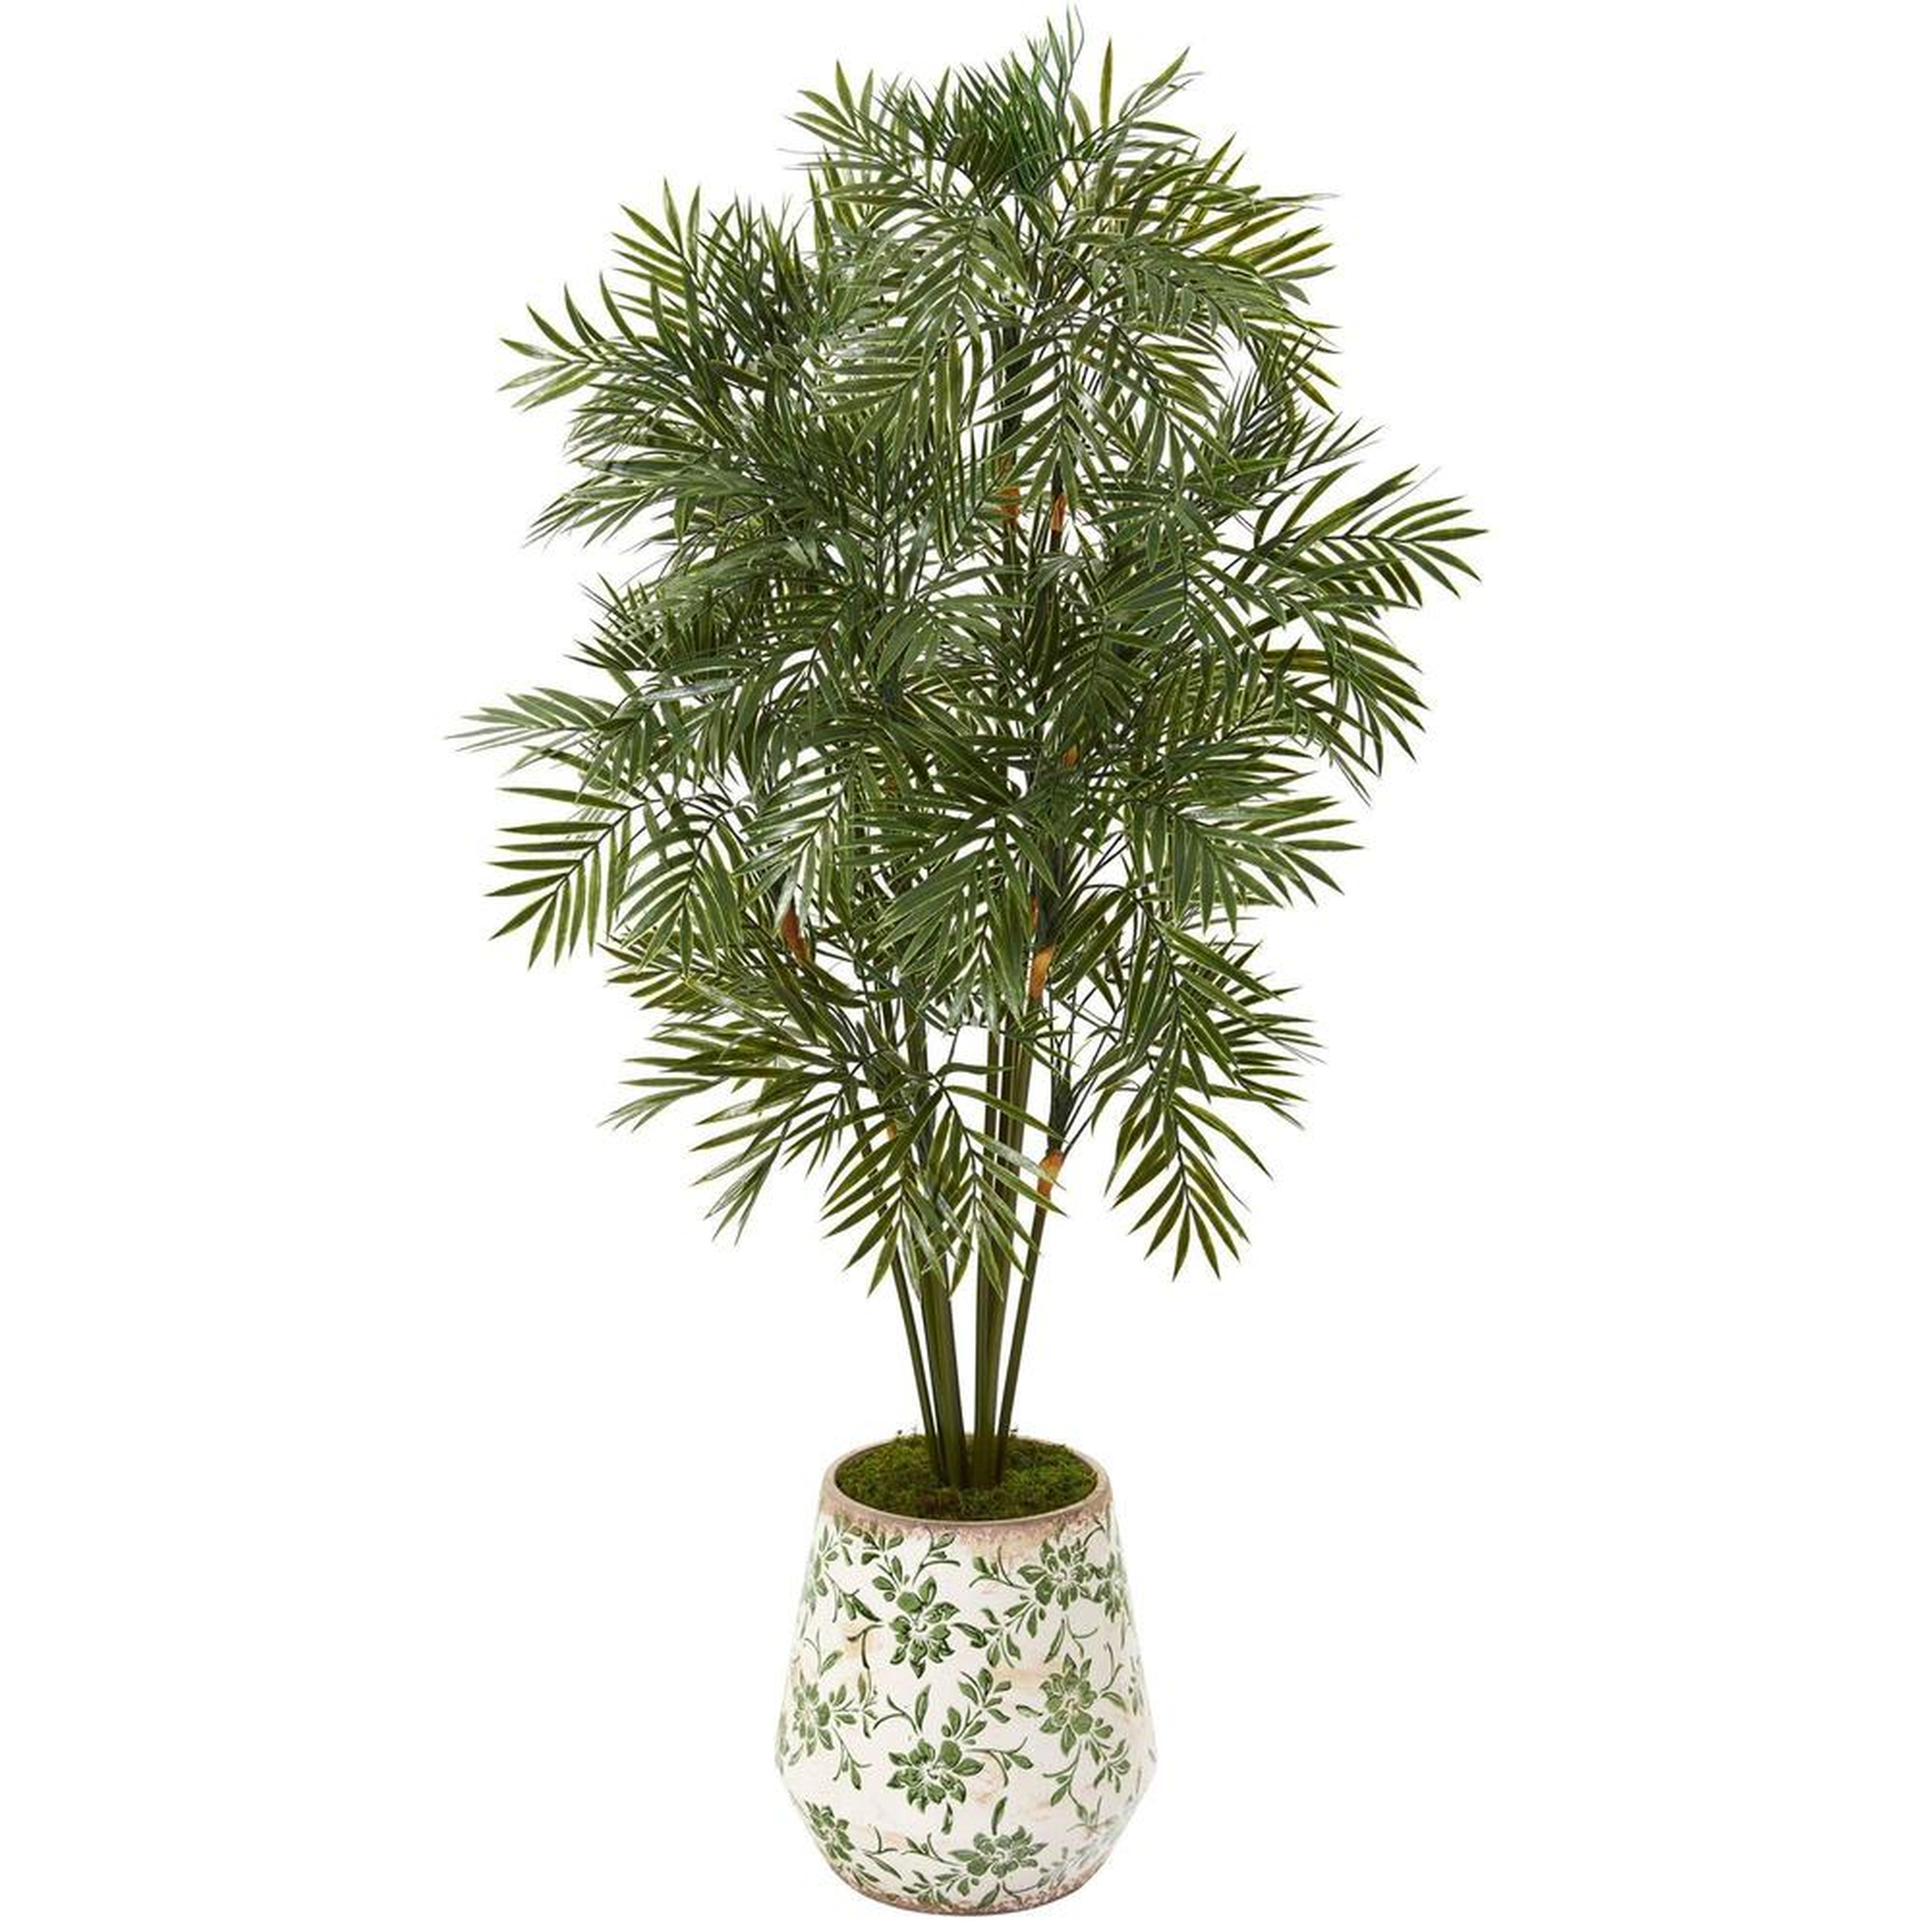 52" Parler Palm Artificial Tree in Planter - Fiddle + Bloom